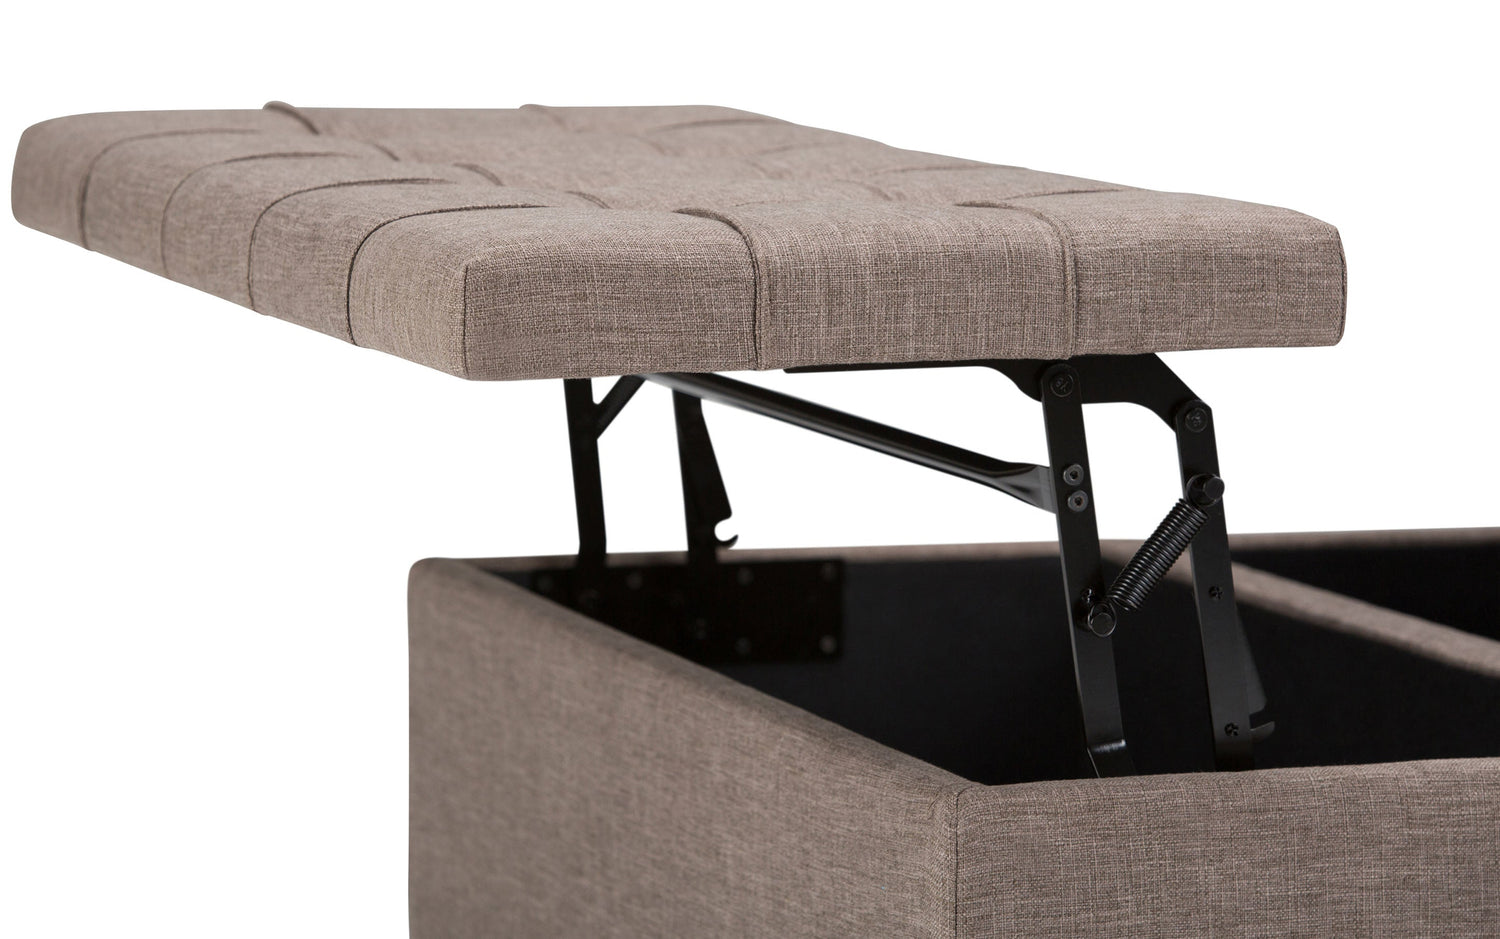 Fawn Brown Linen Style Fabric | Harrison Coffee Table Storage Ottoman